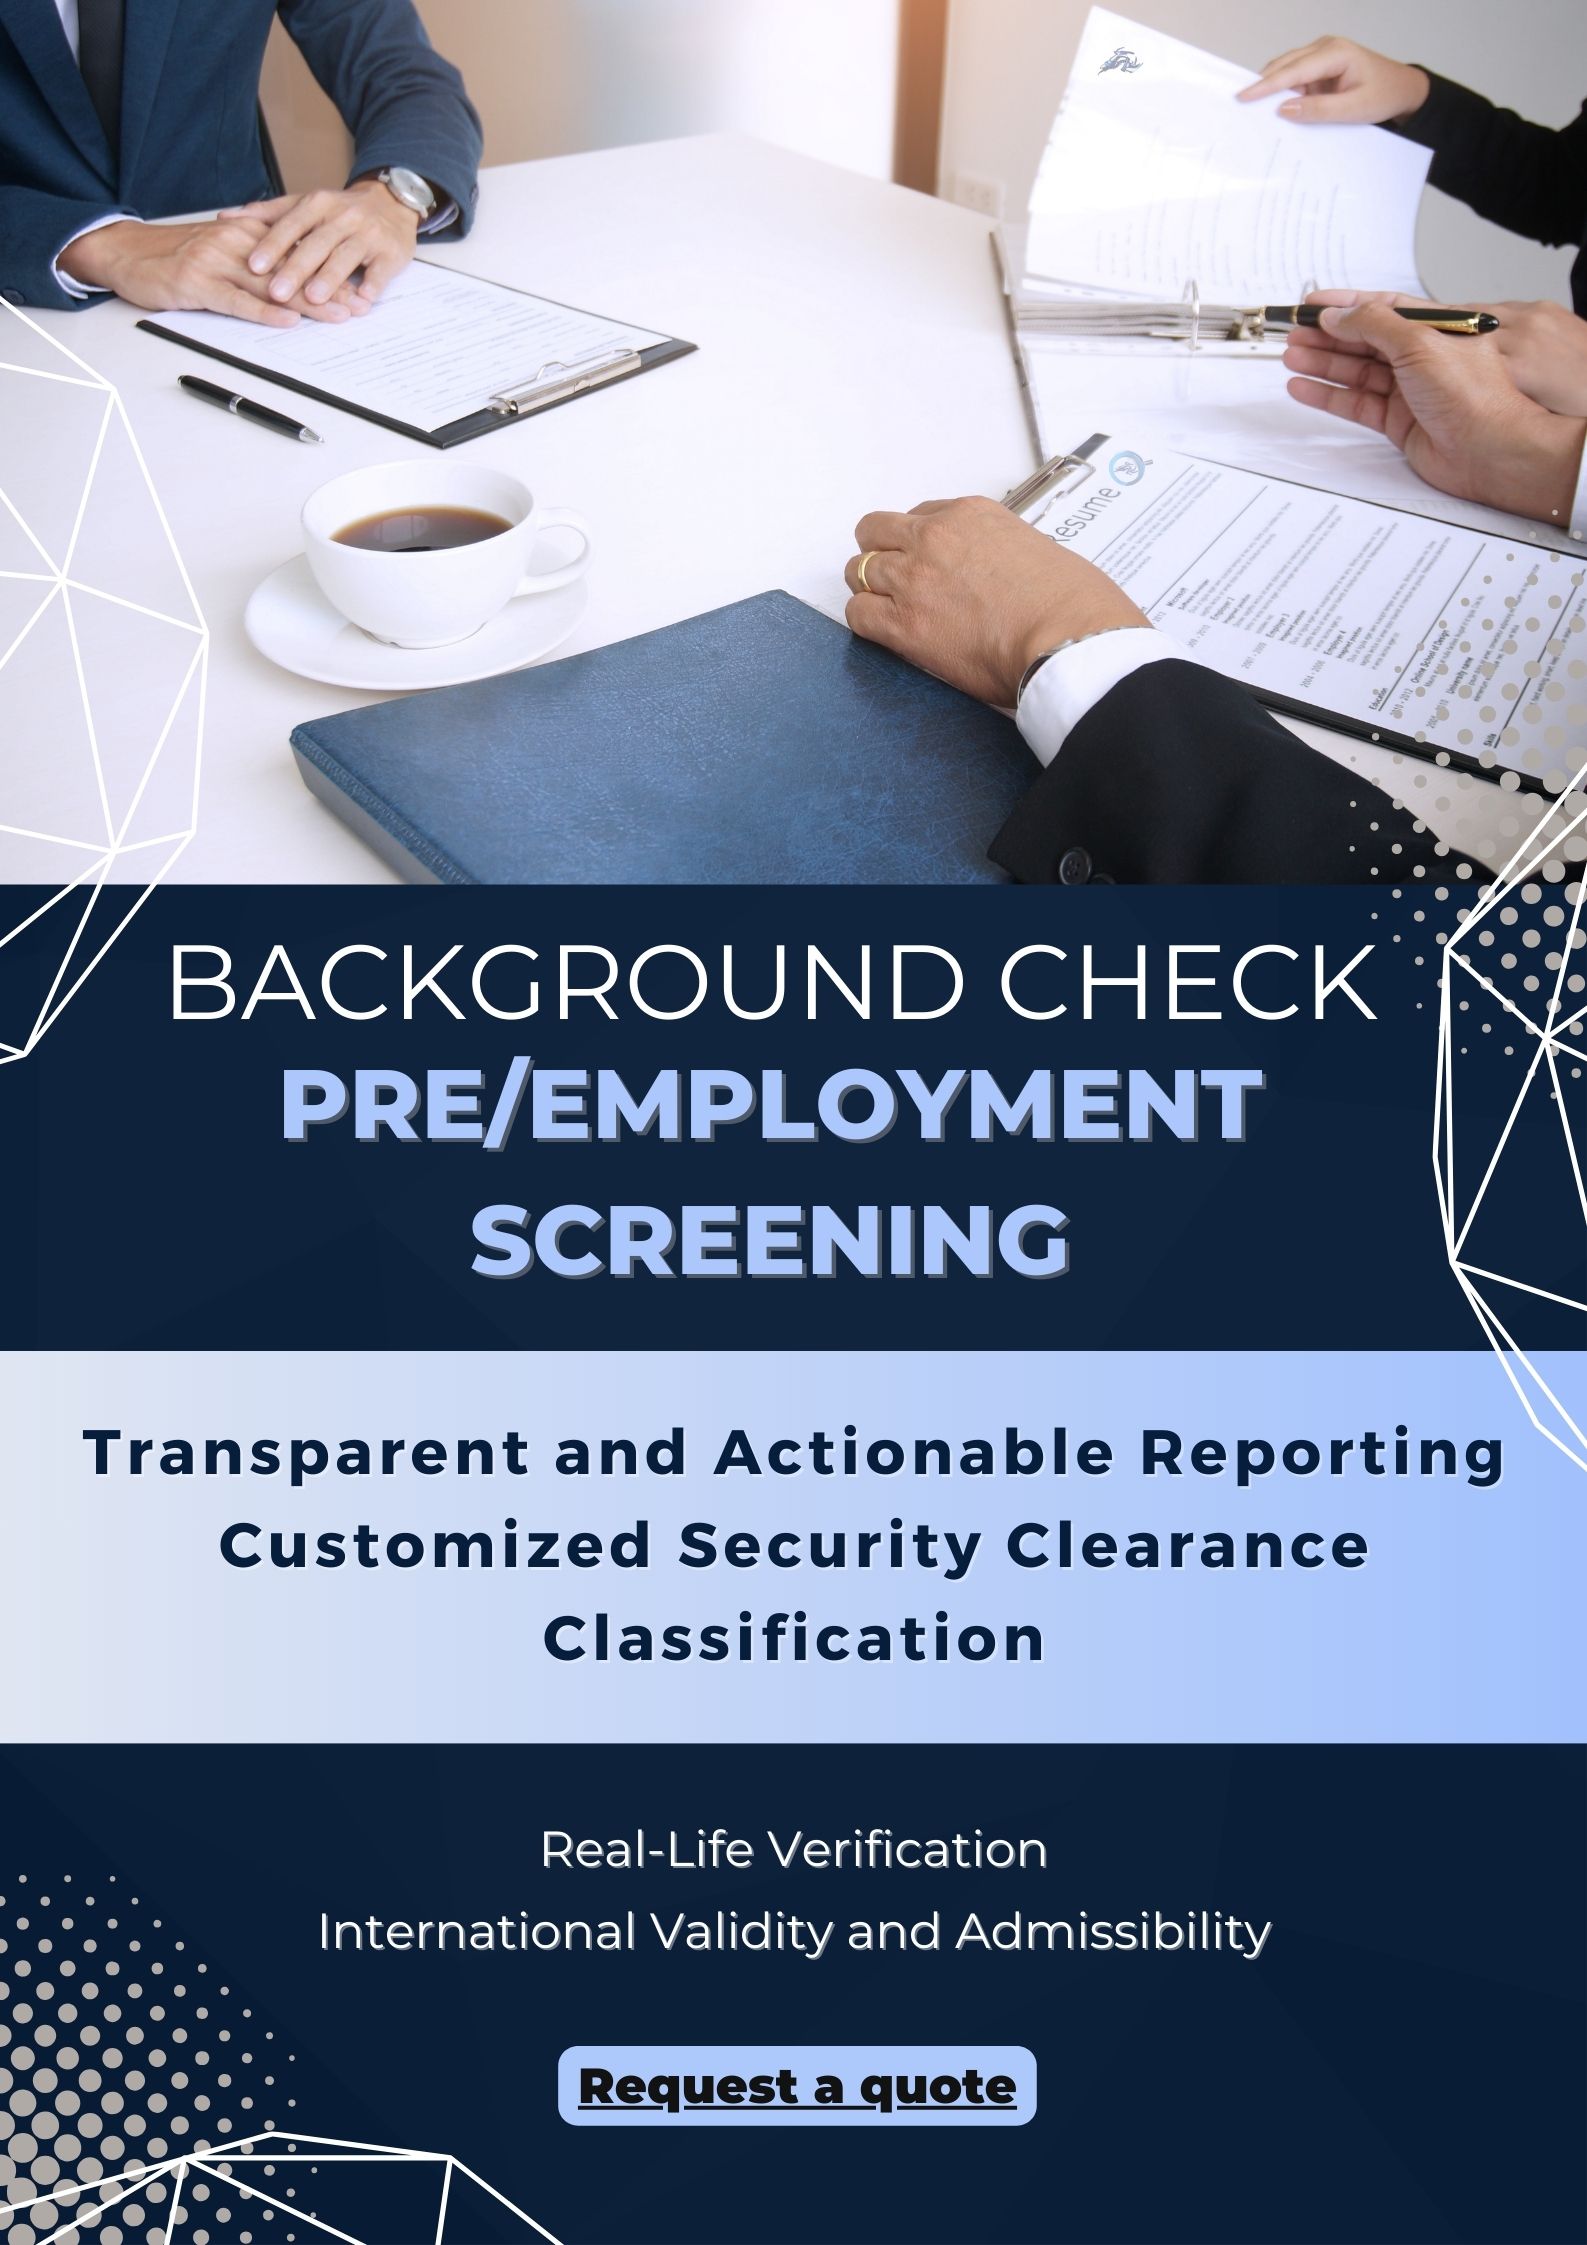 Pre/Employment Screening & Background Check